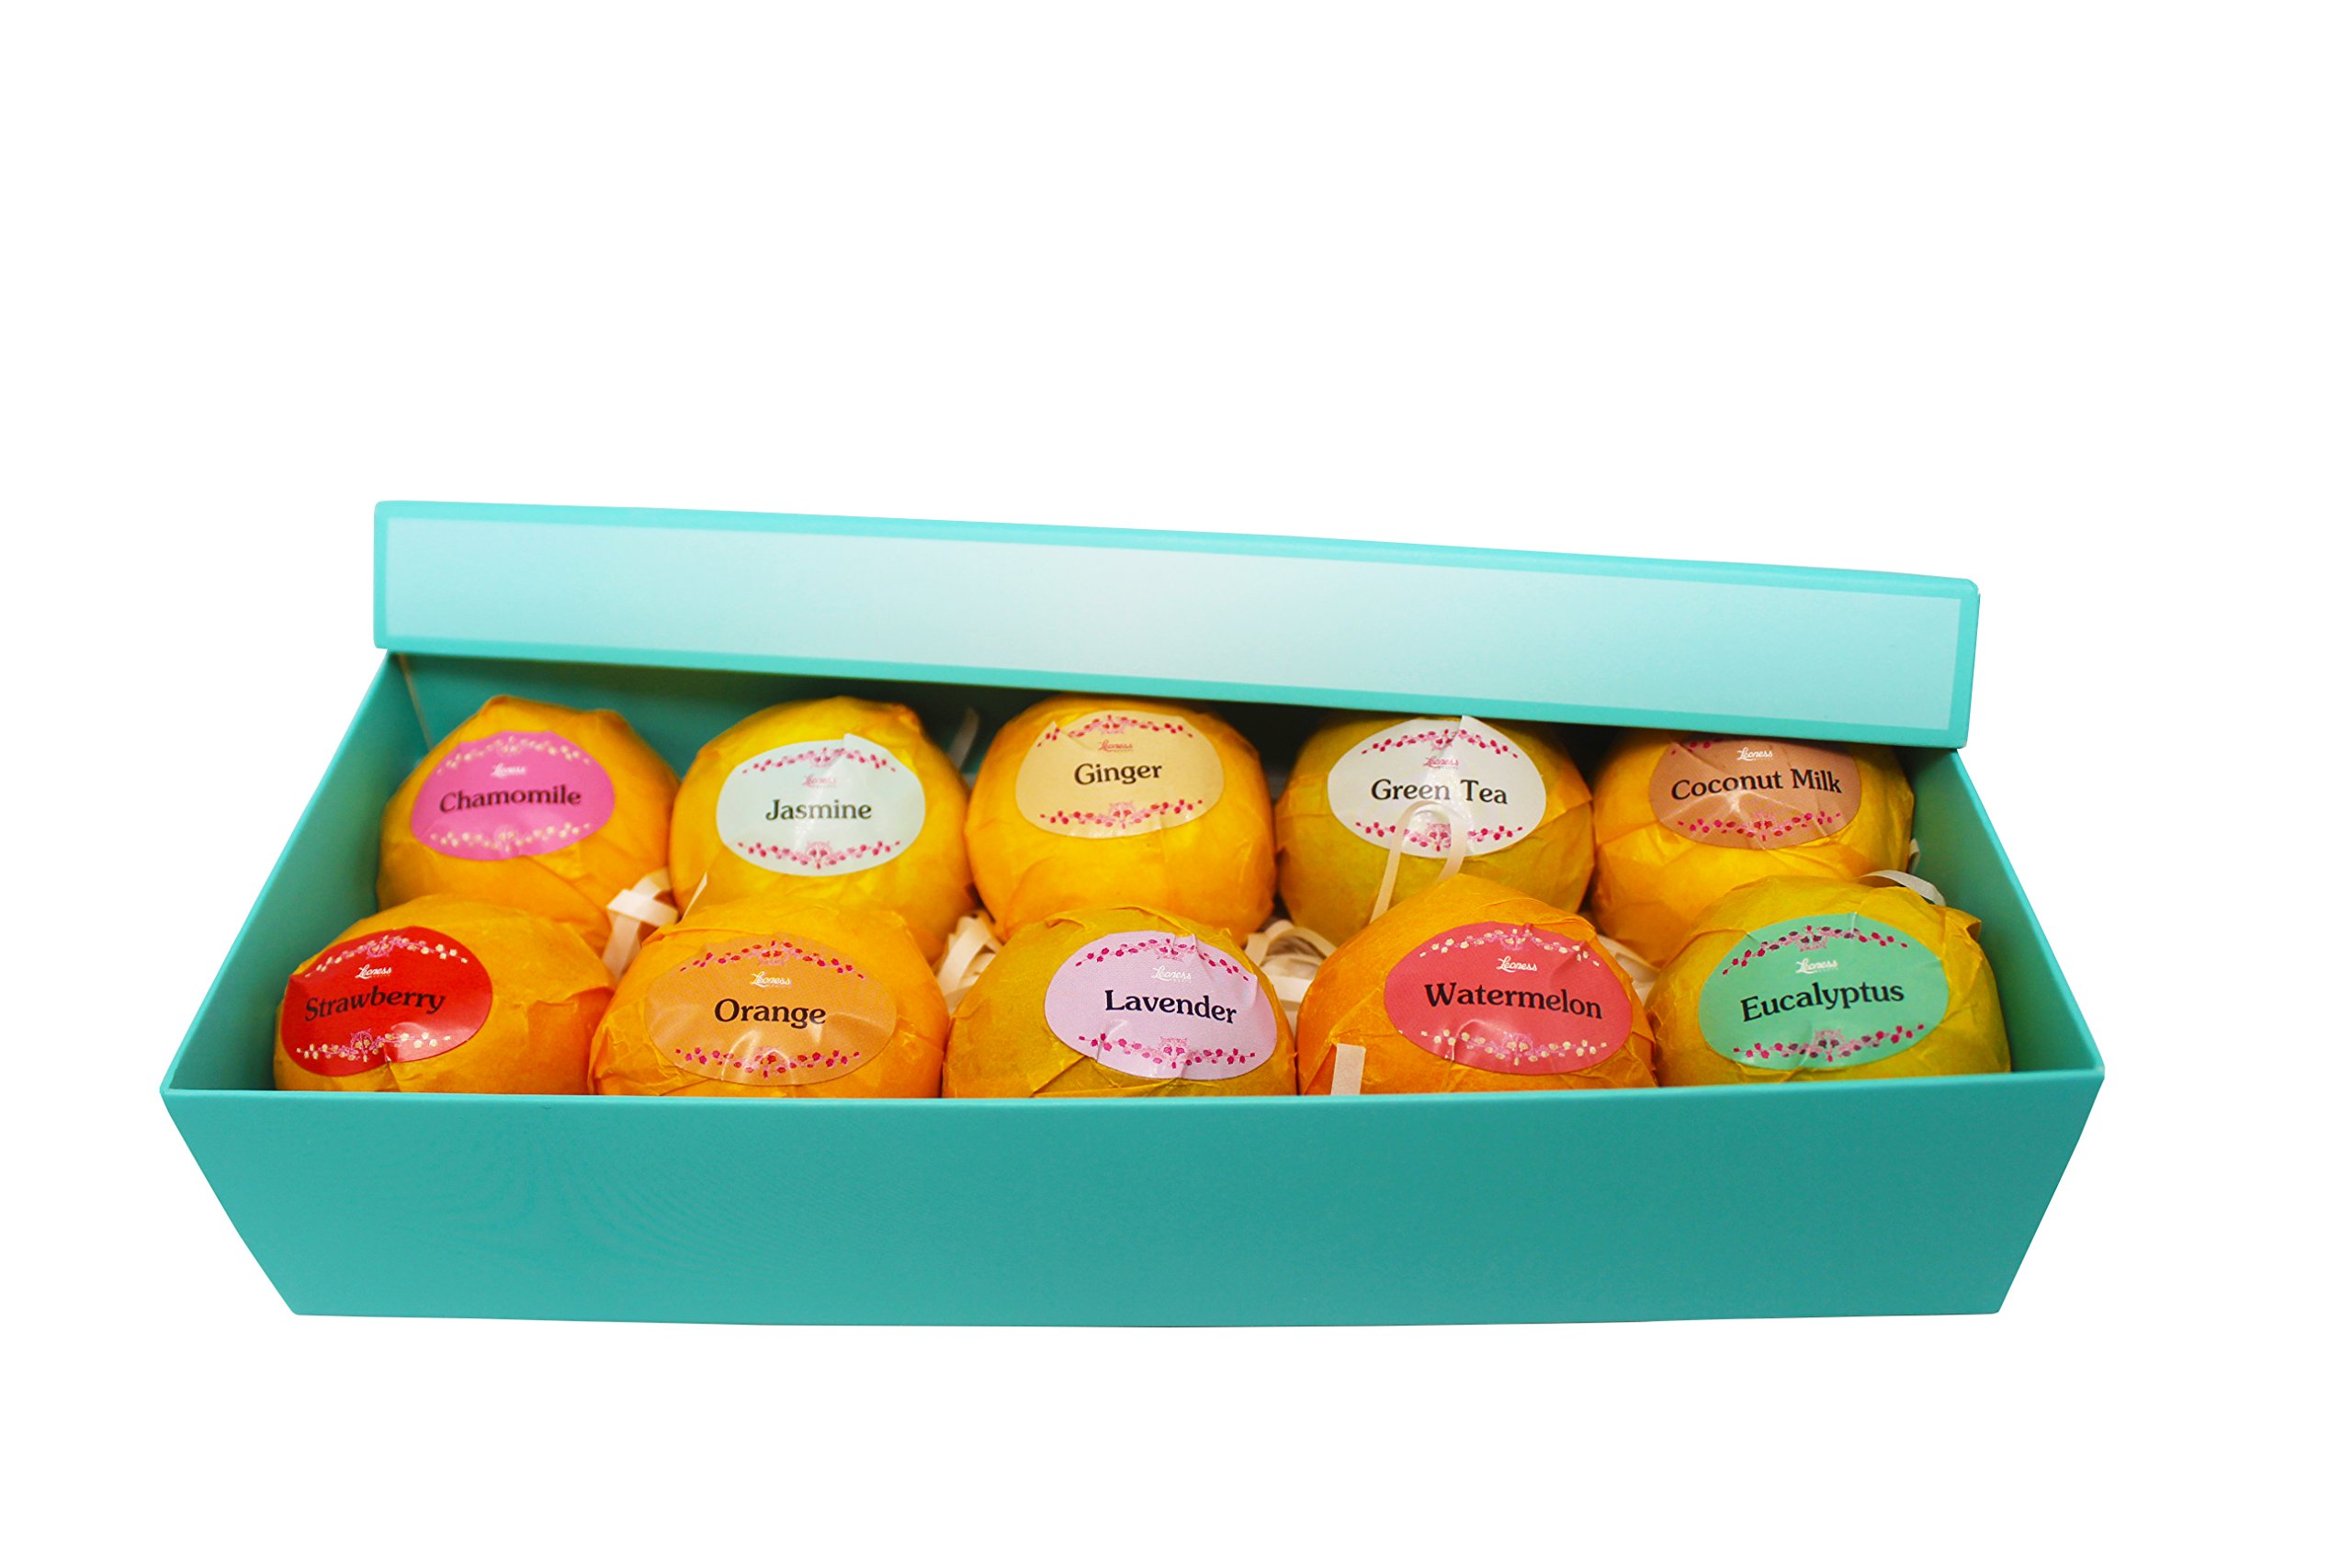 Bath Bombs Gift Set – 10 Unique Scents – Great Gift idea for Women, Mom, Girls, Teens, Graduation, Valentines Day, and Birthdays – Spa Aromatherapy - Relaxation in a Box